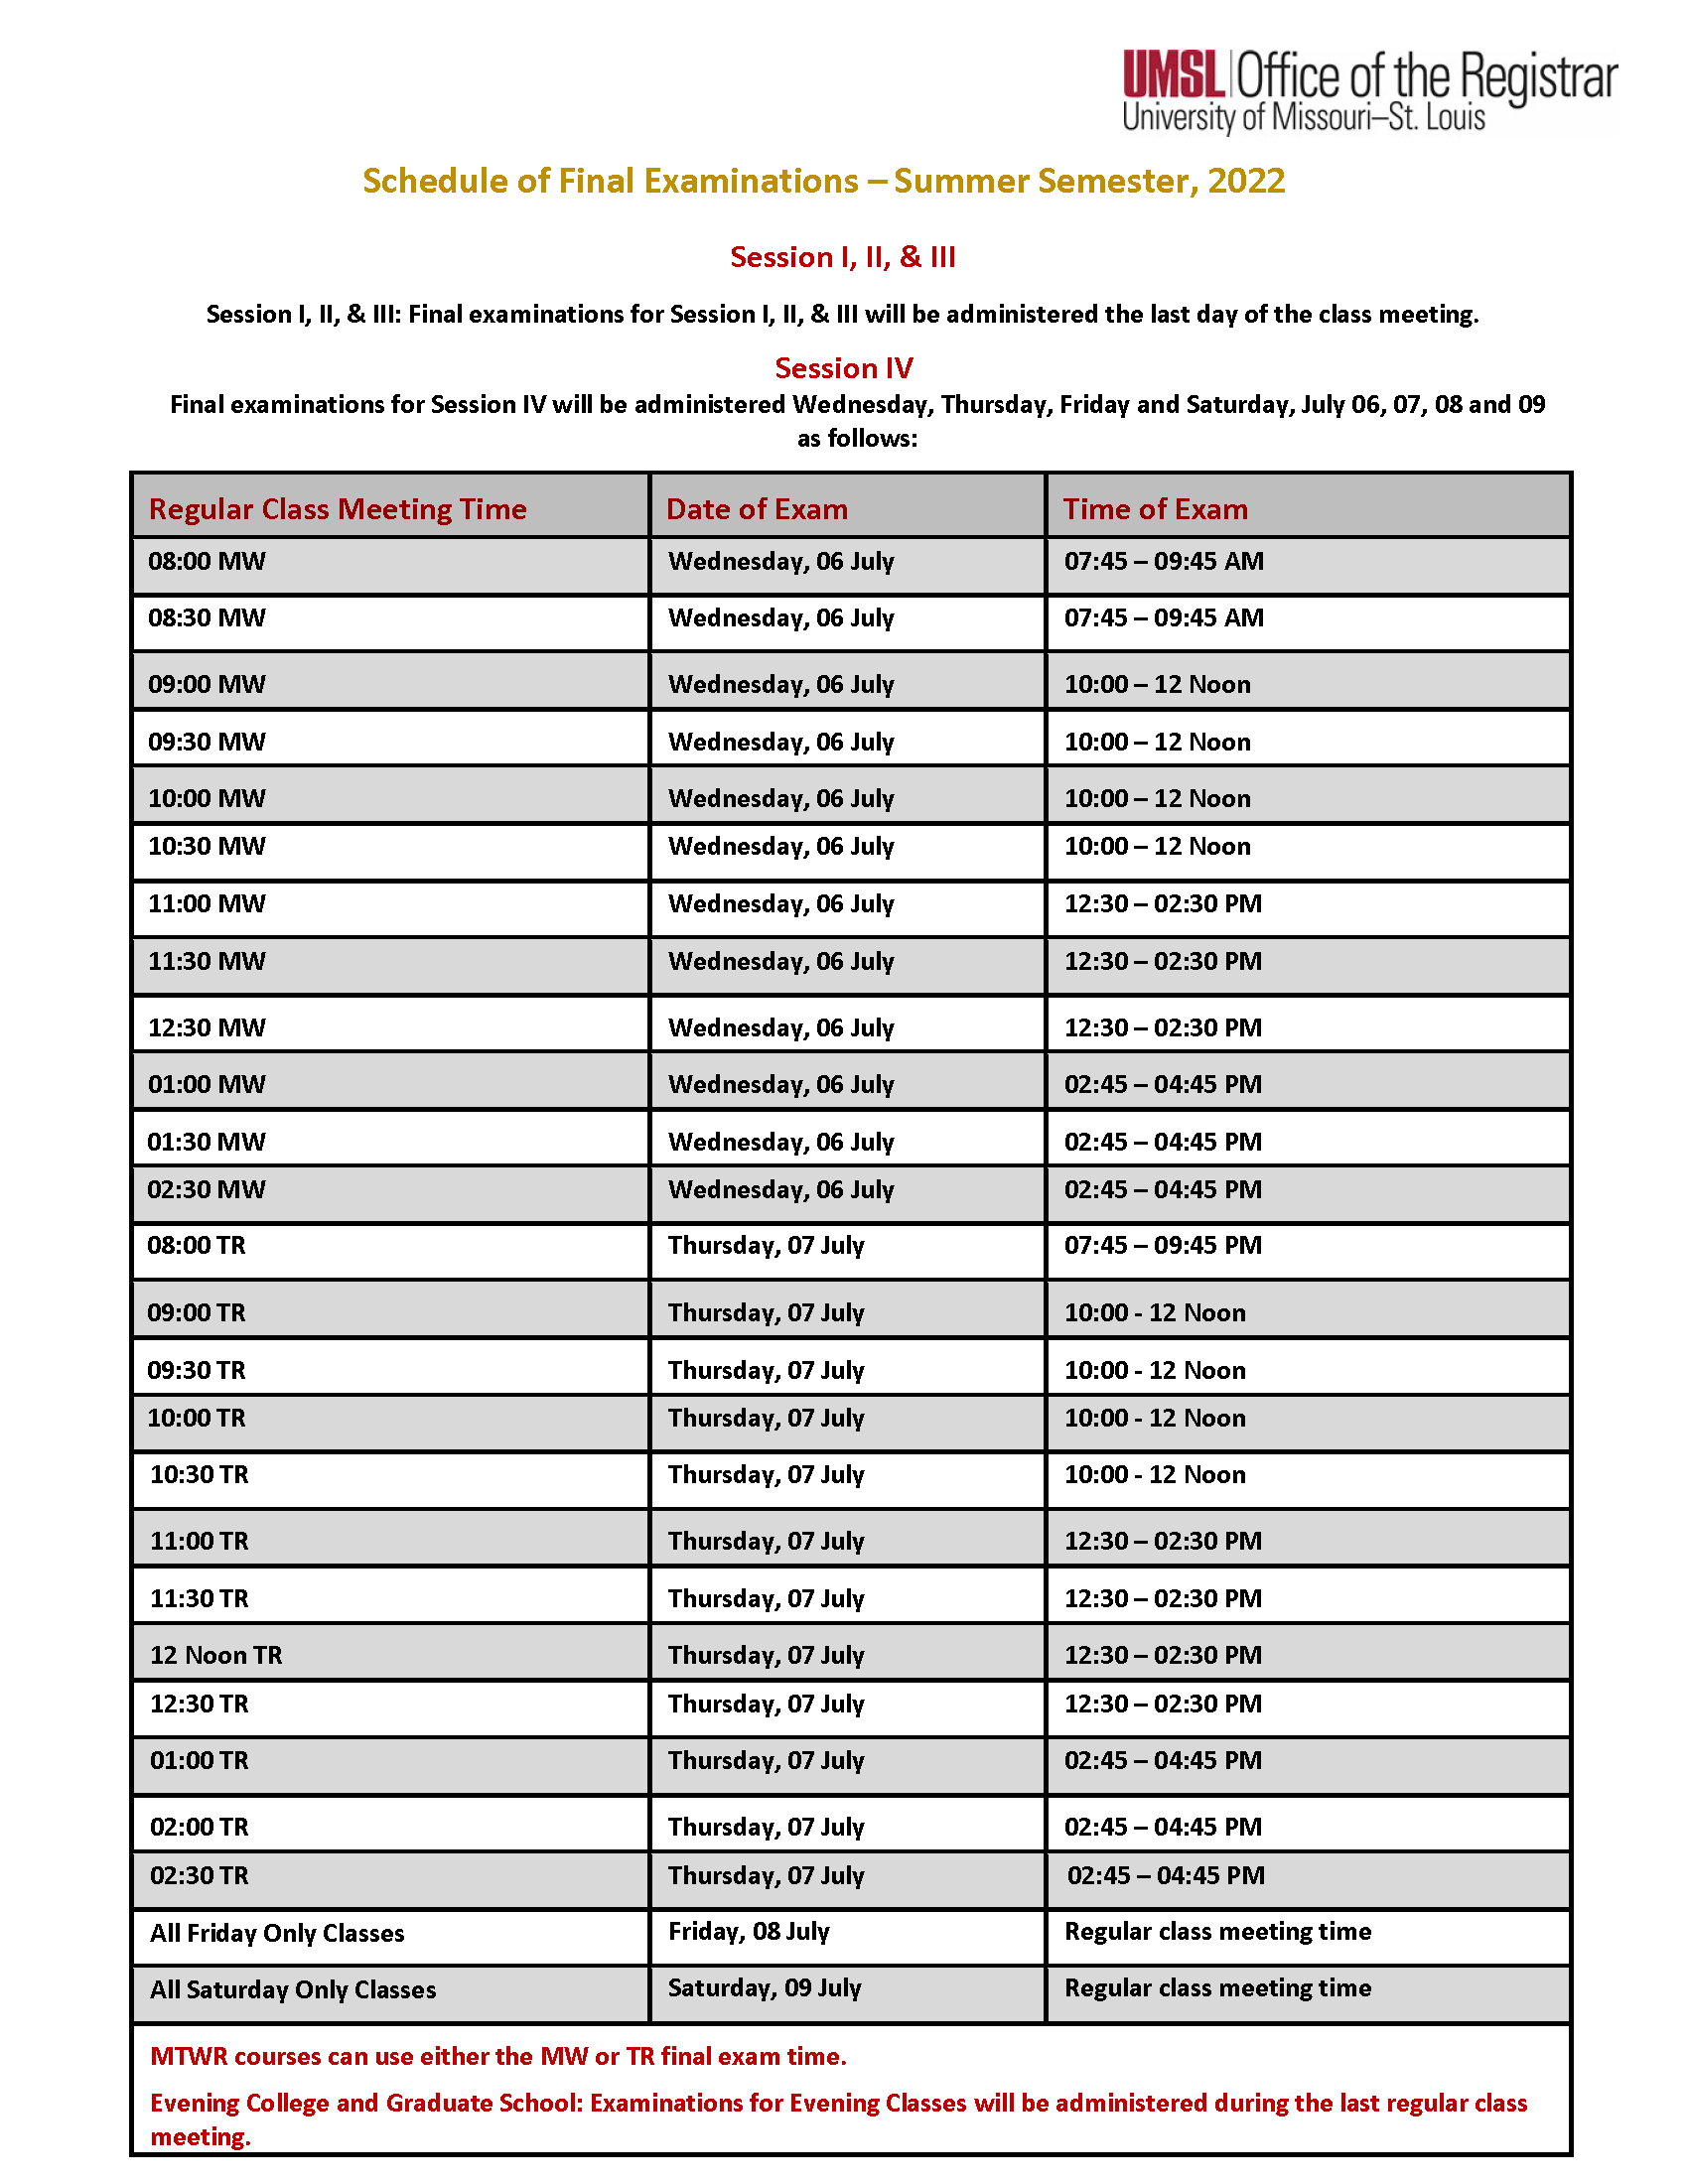 ss22_final_exam_schedule_11022_page_1.png